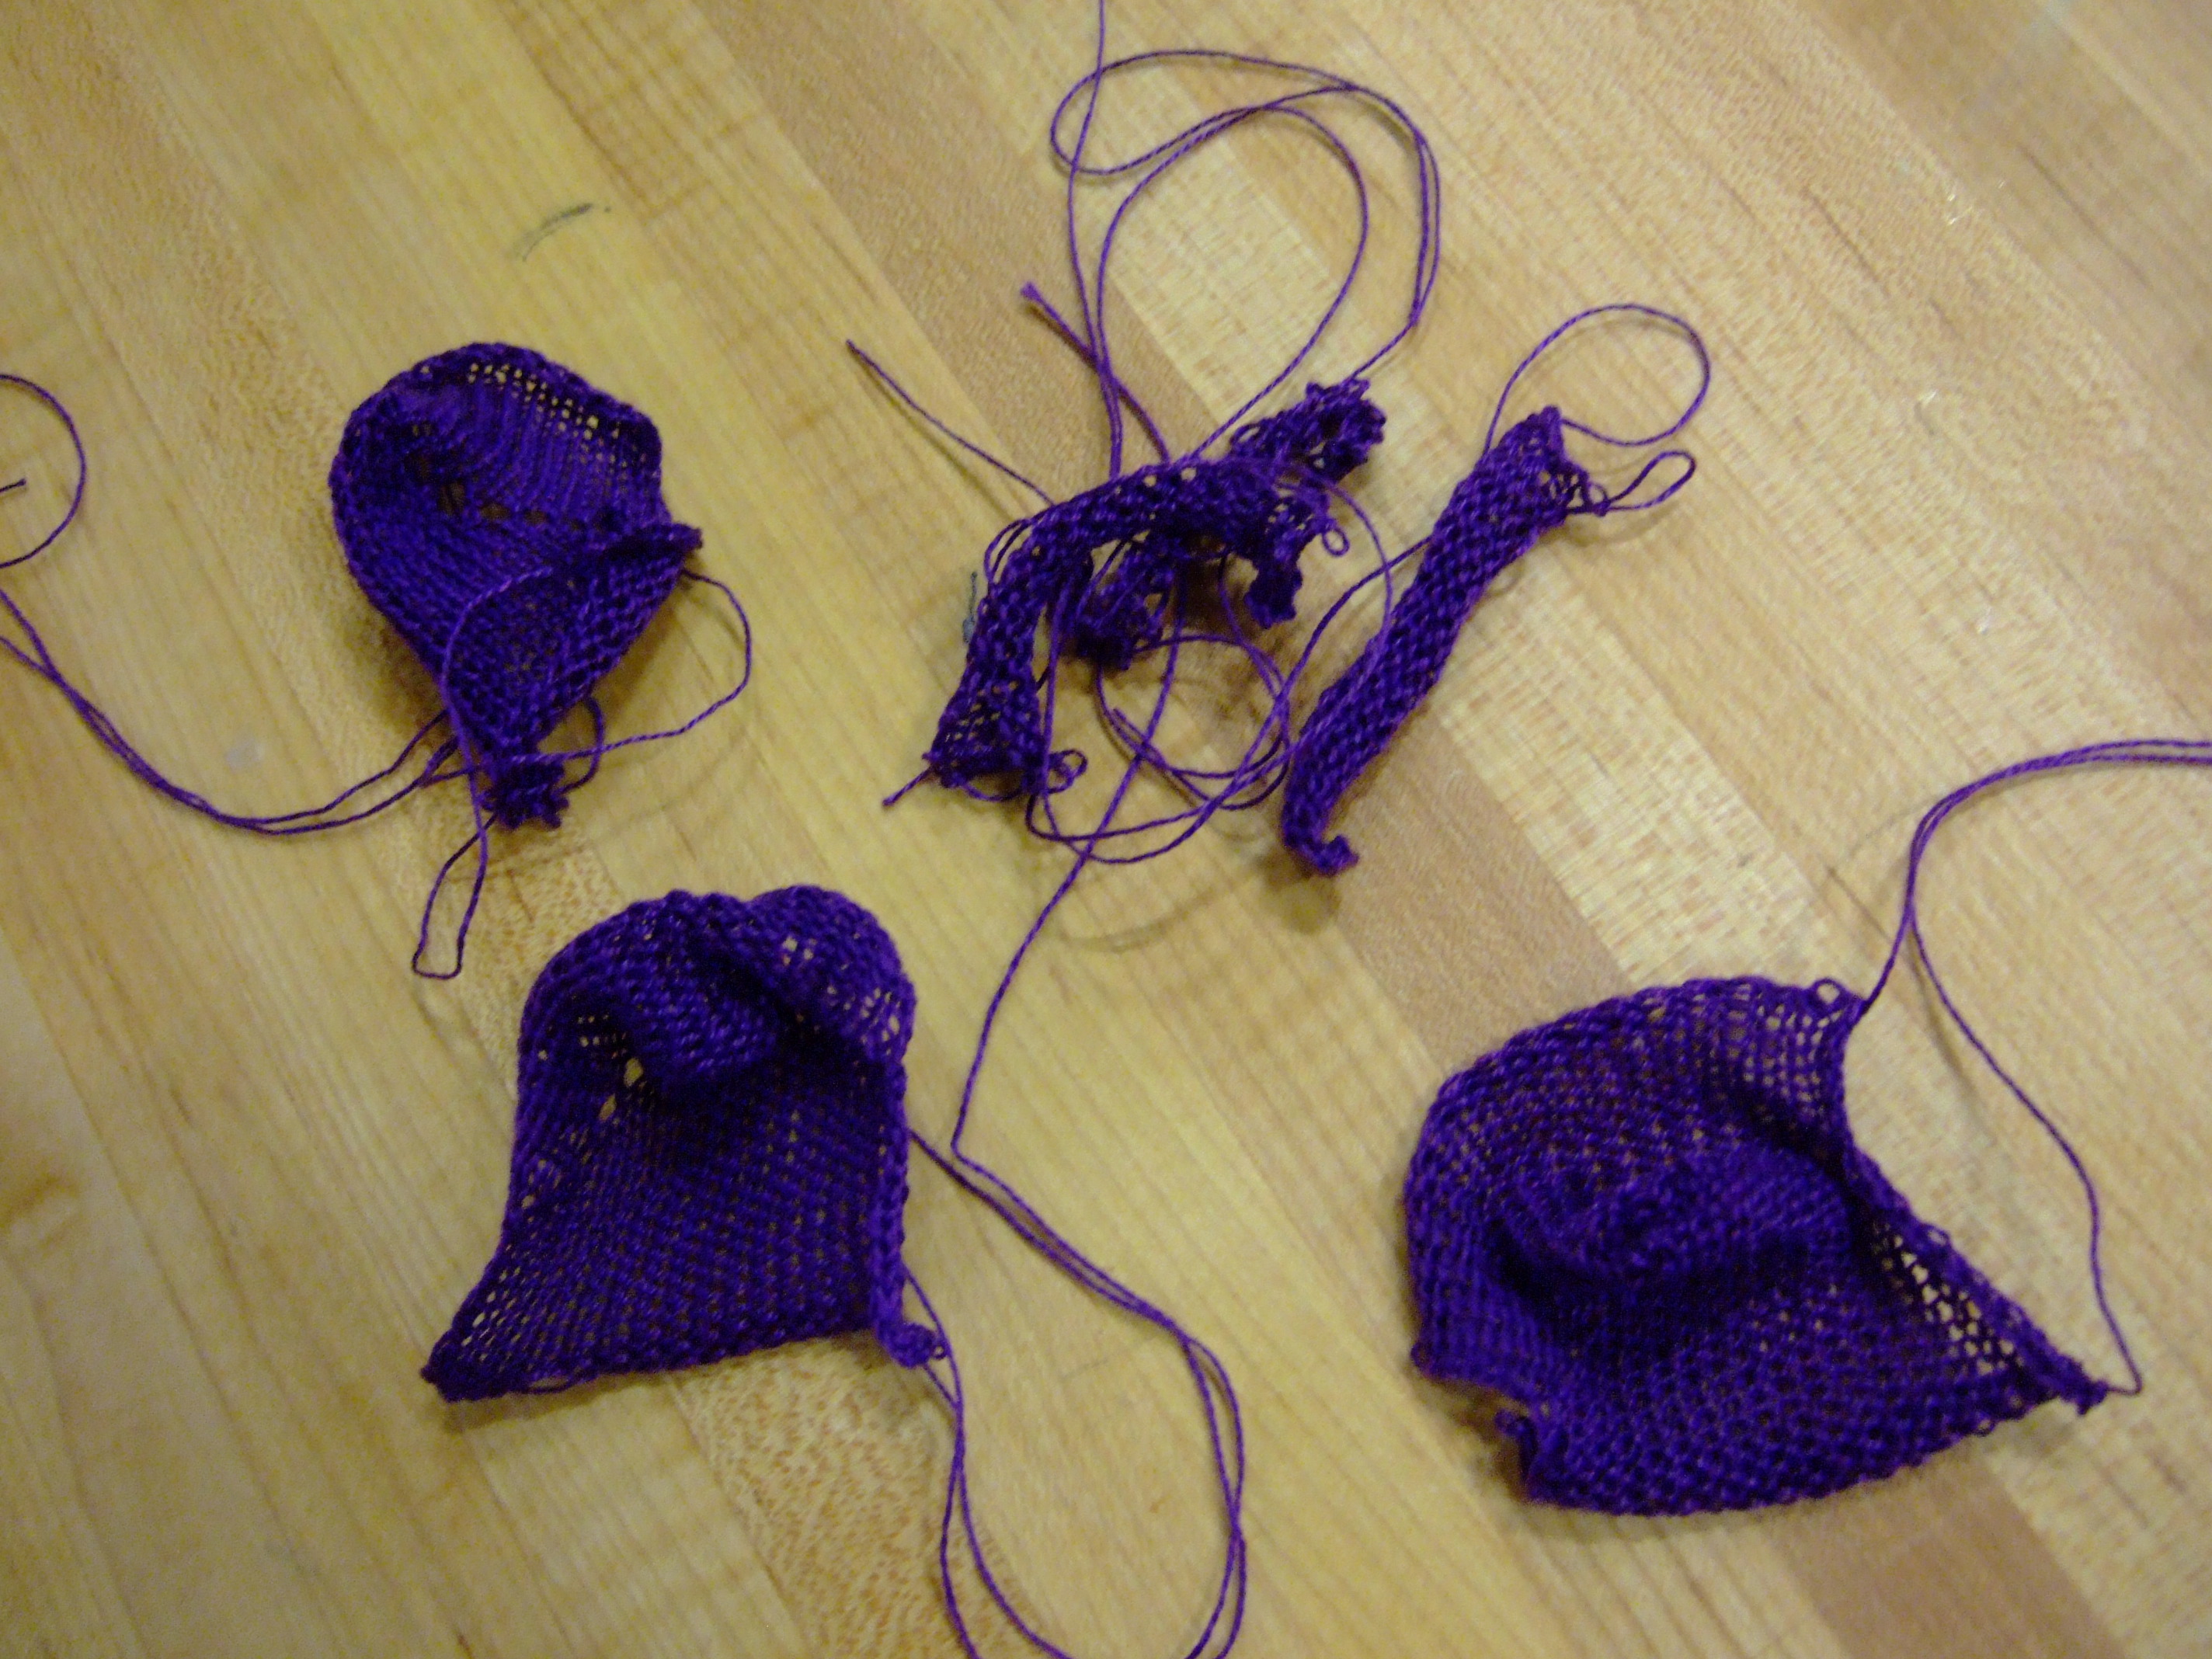 Results of first few tries on knitting machine